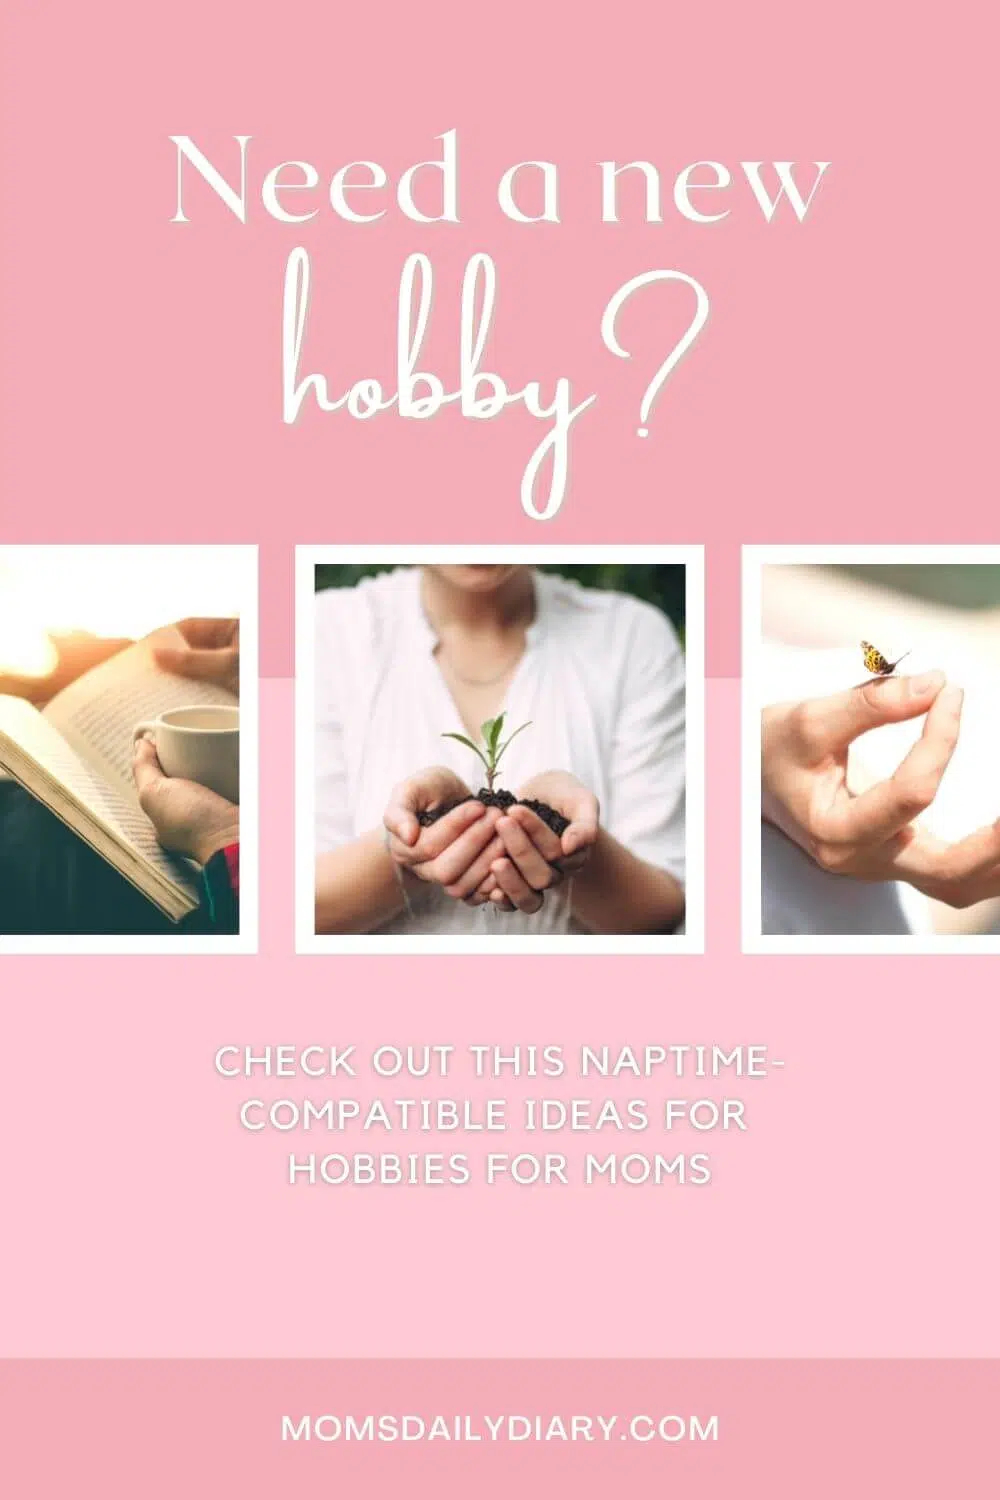 Pinterest pin with images of women reading, gardening, and meditating, and text "Need a new hobby? Check out these naptime-compatible ideas for hobbies for moms"